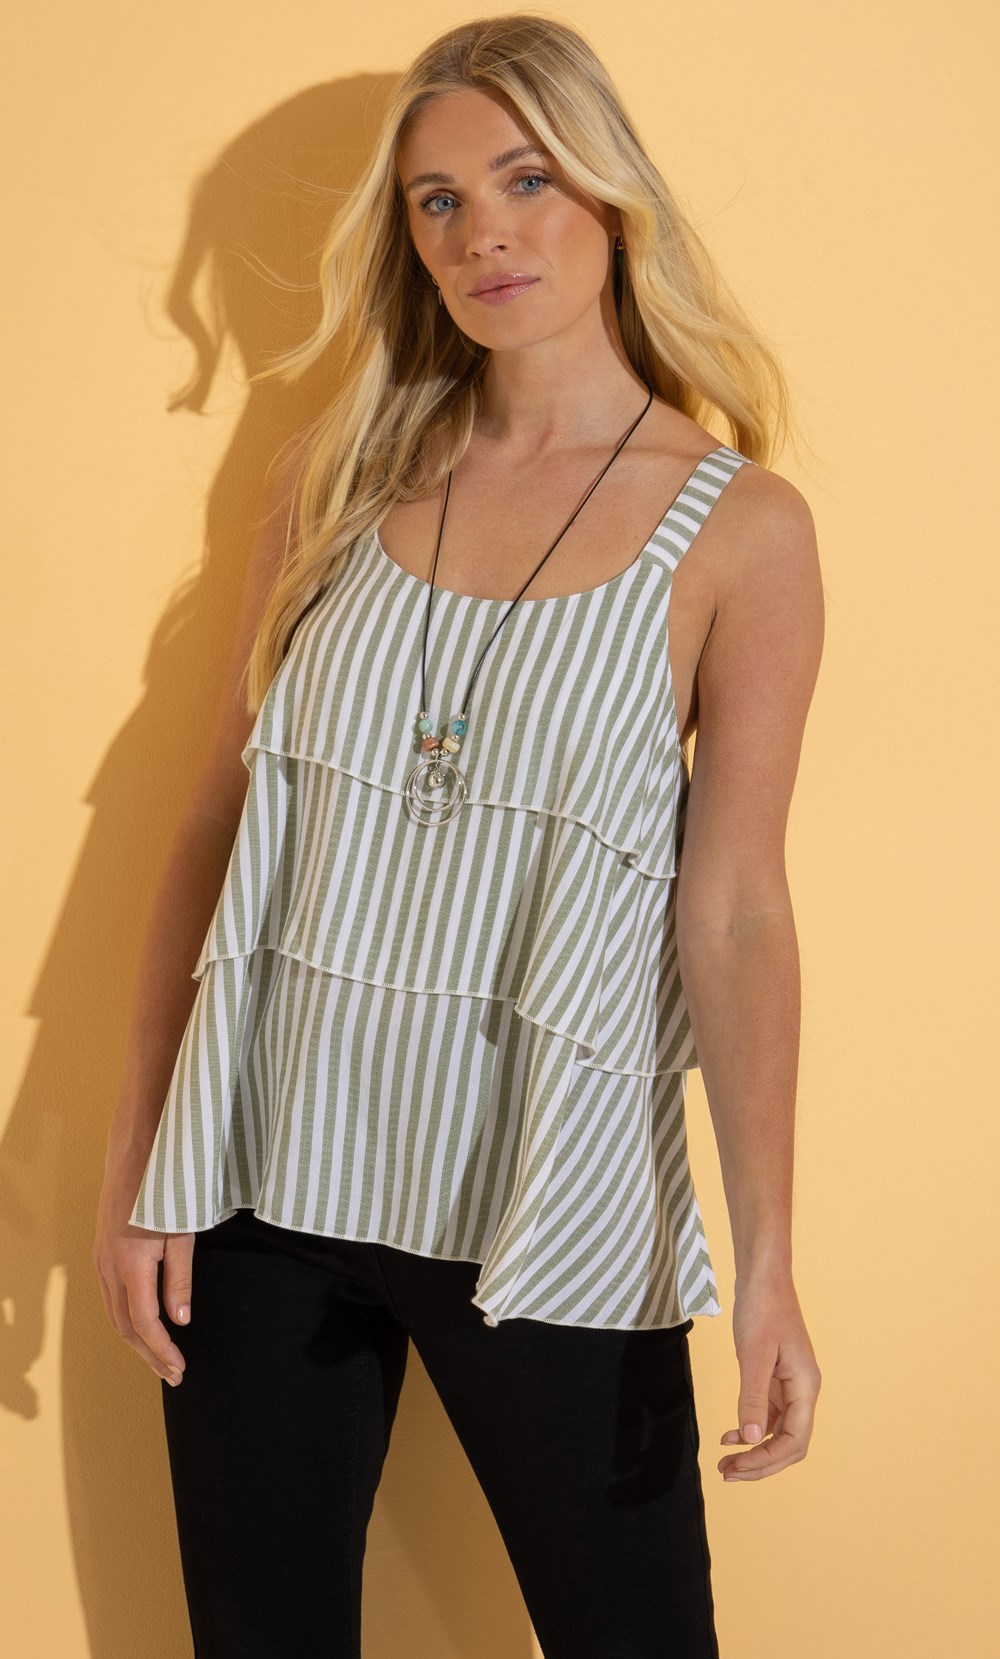 Tiered Striped  Strappy Top With Necklace